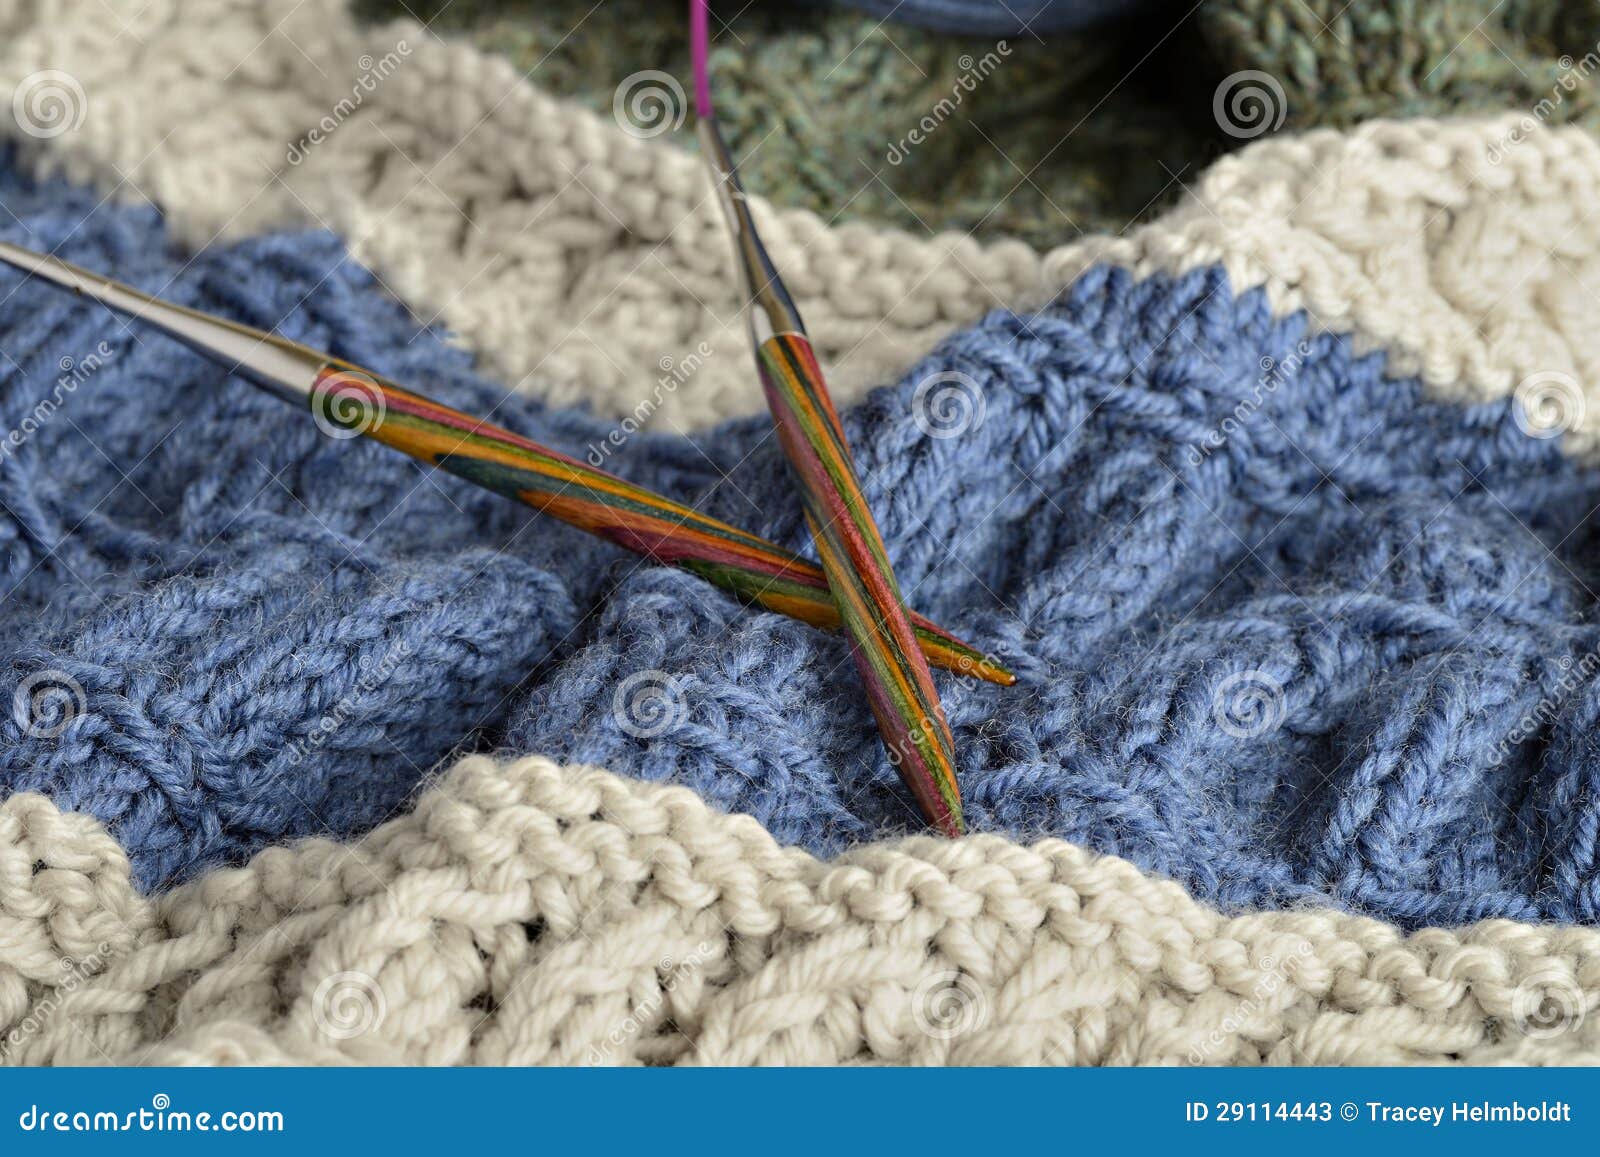 Circular Needle with a Knited Blanket Stock Image - Image of design ...